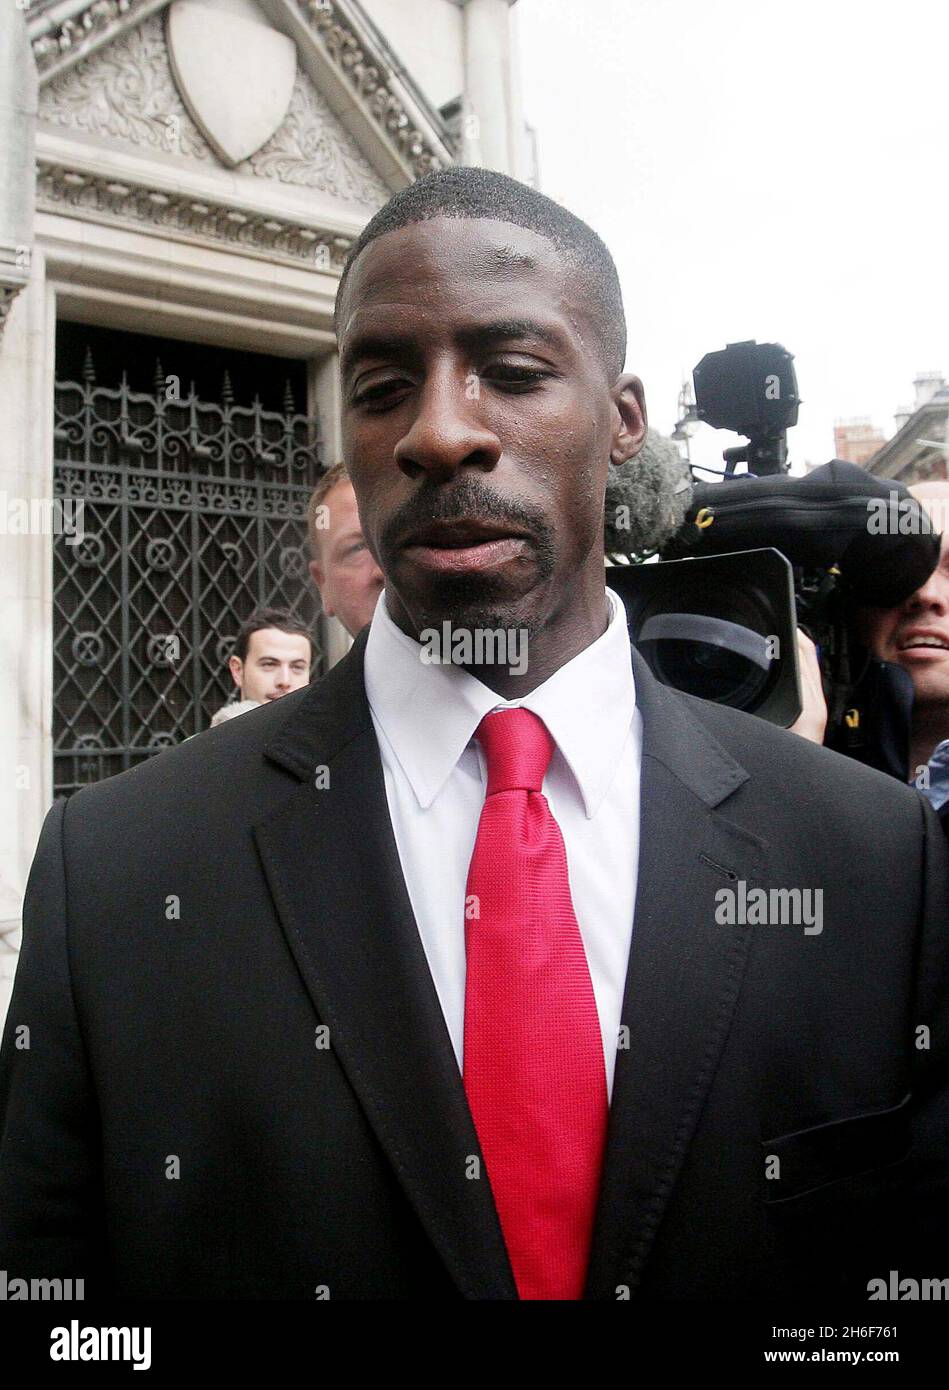 Dwain Chambers leaves the High Court in London, after he lost his appeal to overturn his lifetime ban on competing in Olympic events. Sprinter Dwain Chambers today lost his High Court bid to be allowed to compete at next month's Olympic Games in Beijing. Mr Justice Mackay refused to grant an injunction to temporarily suspend a lifetime ban on Chambers competing at the Olympics. The ban was imposed by the British Olympic Association (BOA) because of his self-confessed past use of performance-enhancing drugs. Stock Photo